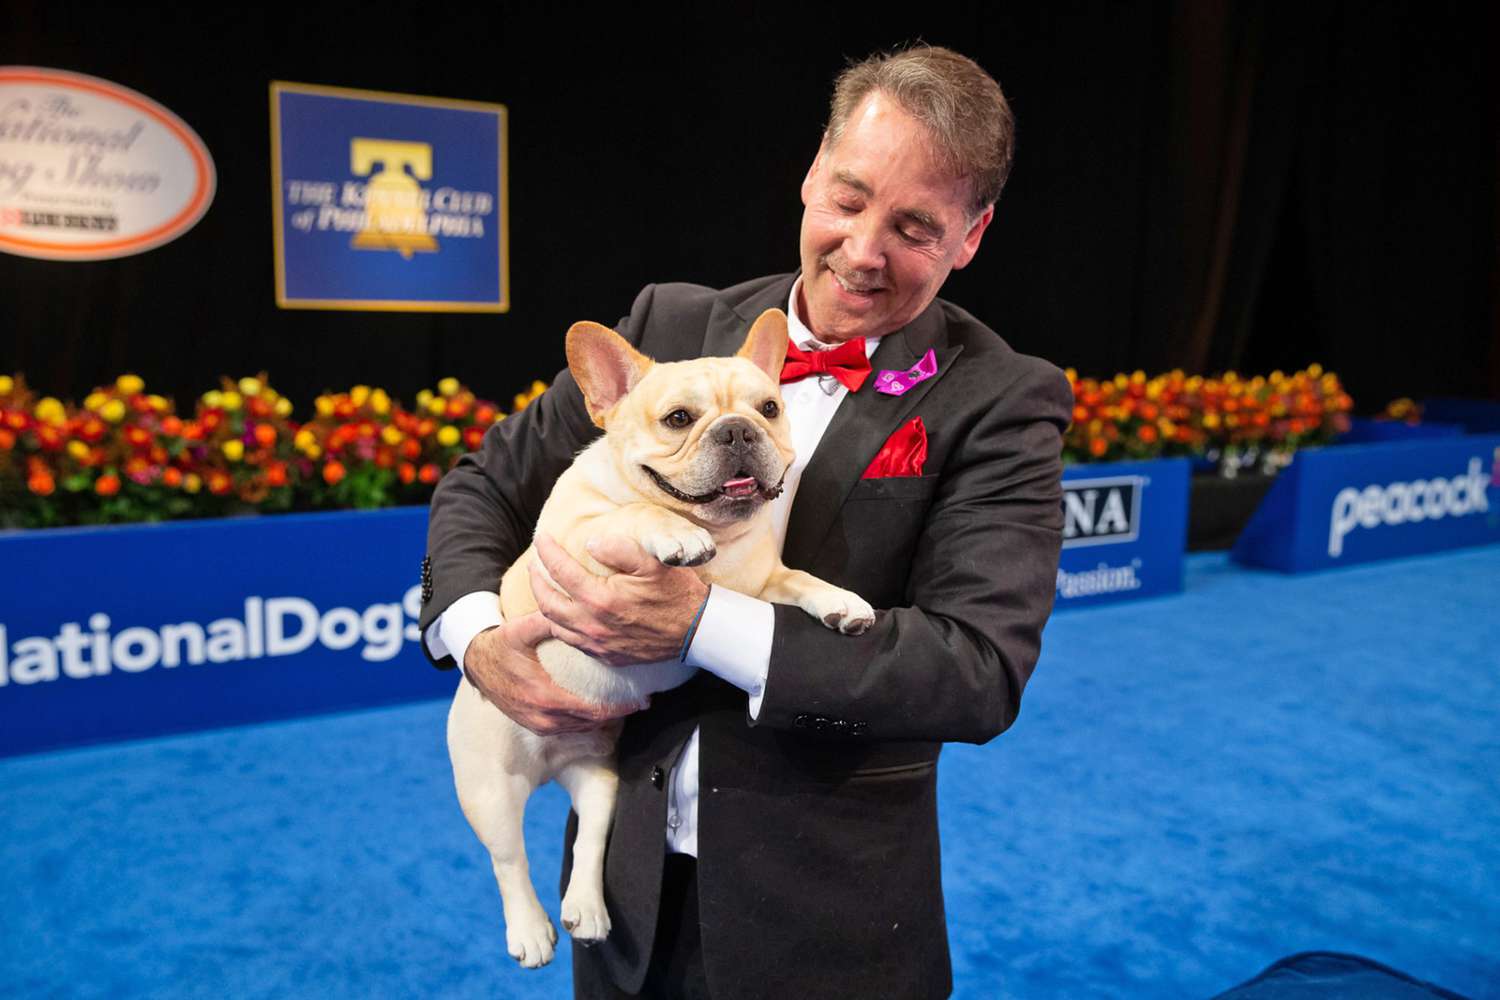 Handler and part owner, Perry Payson, holding the 2022 National Dog Show winner, Winston, the french bulldog